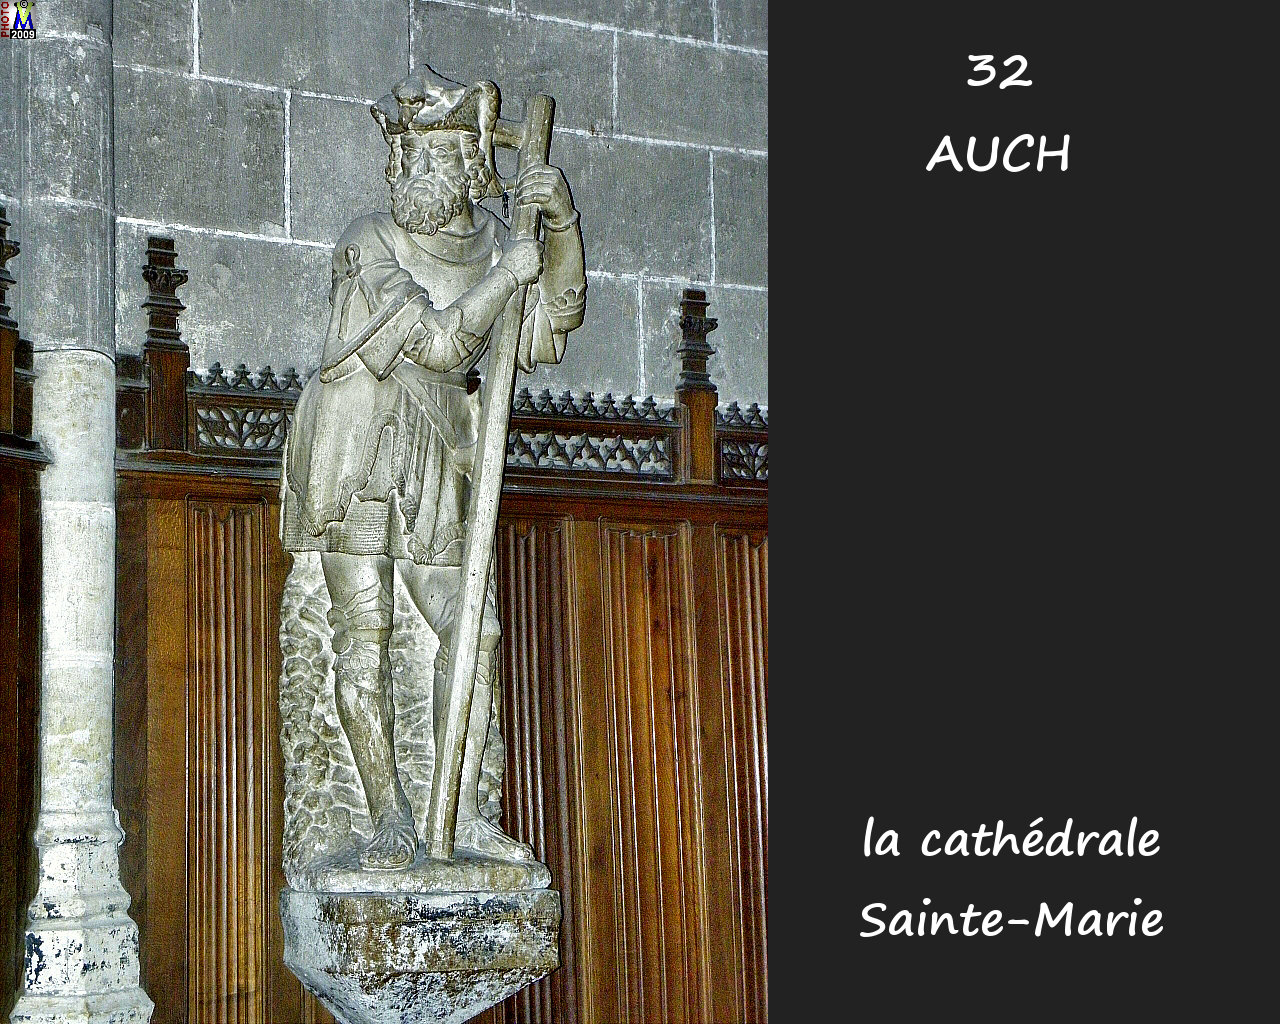 32AUCH_cathedrale_246.jpg